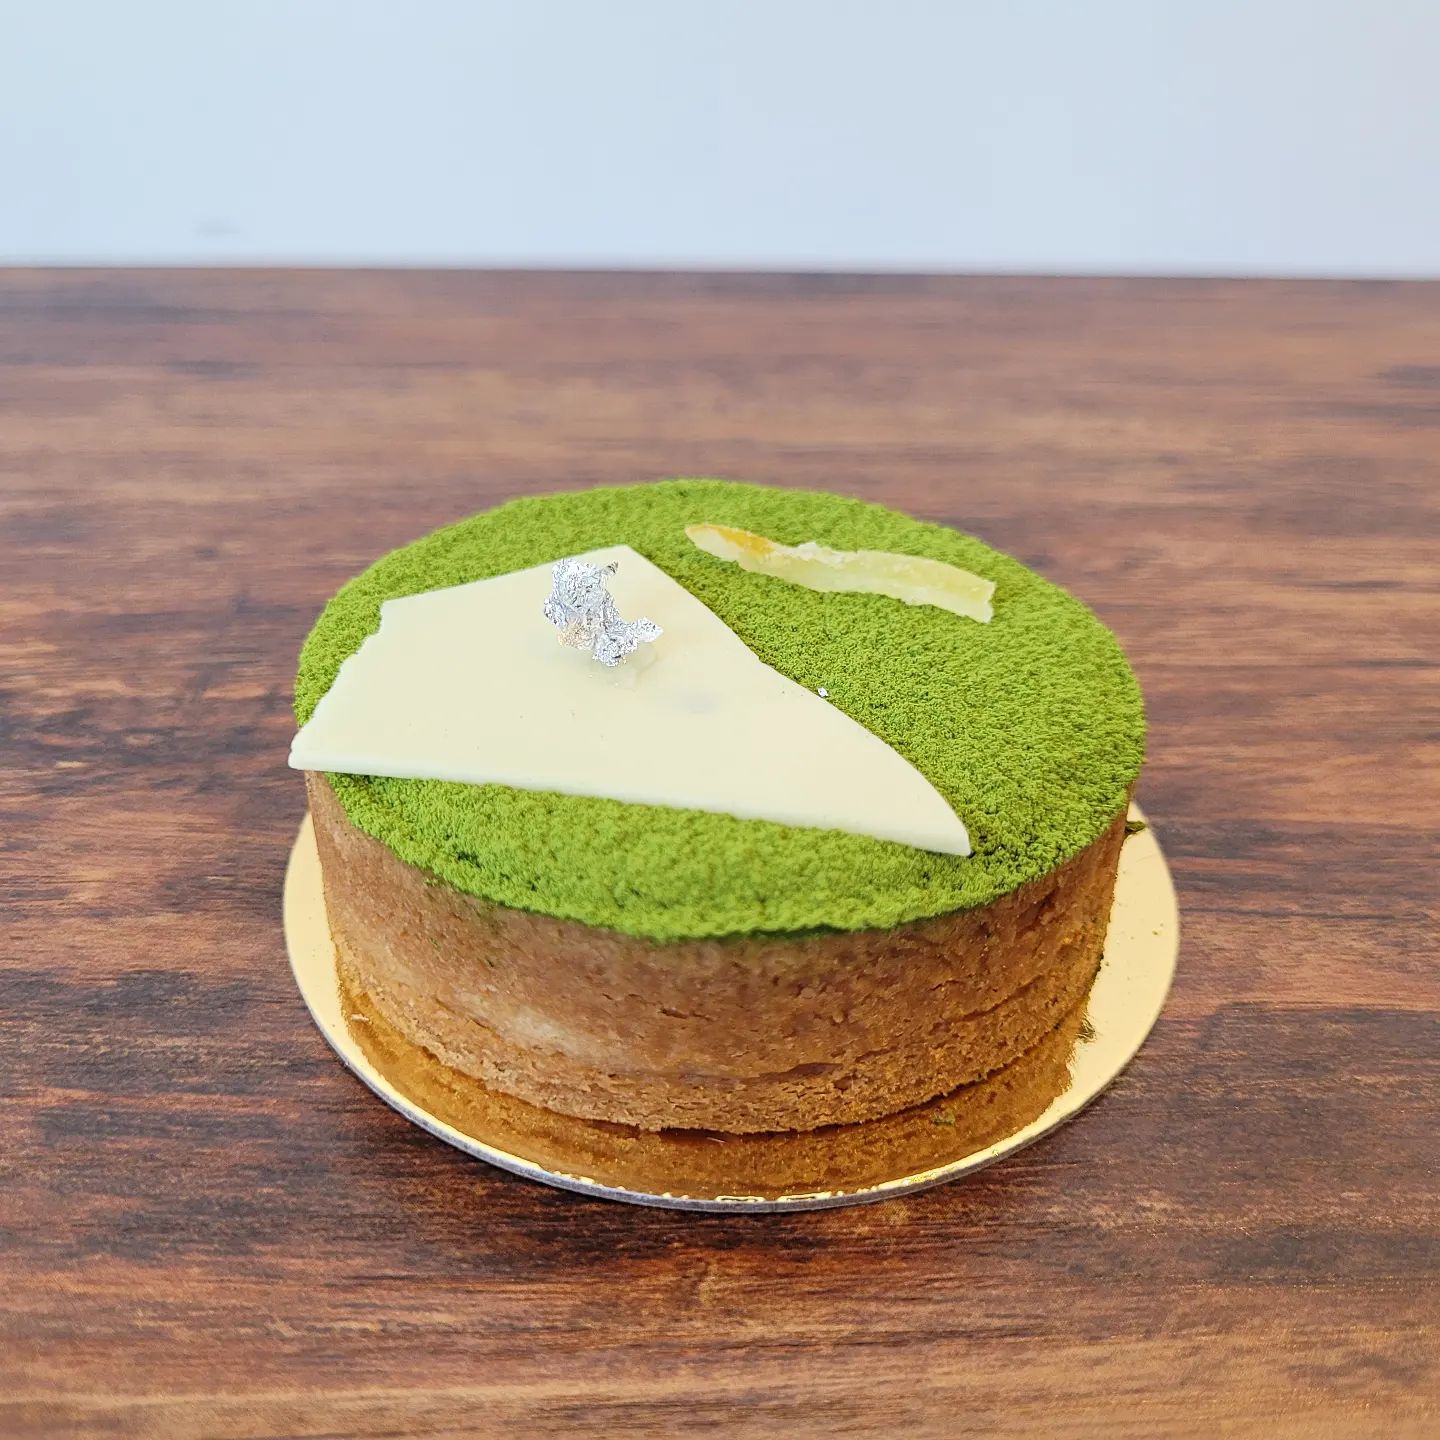 tart dusted with vibrant green matcha powder